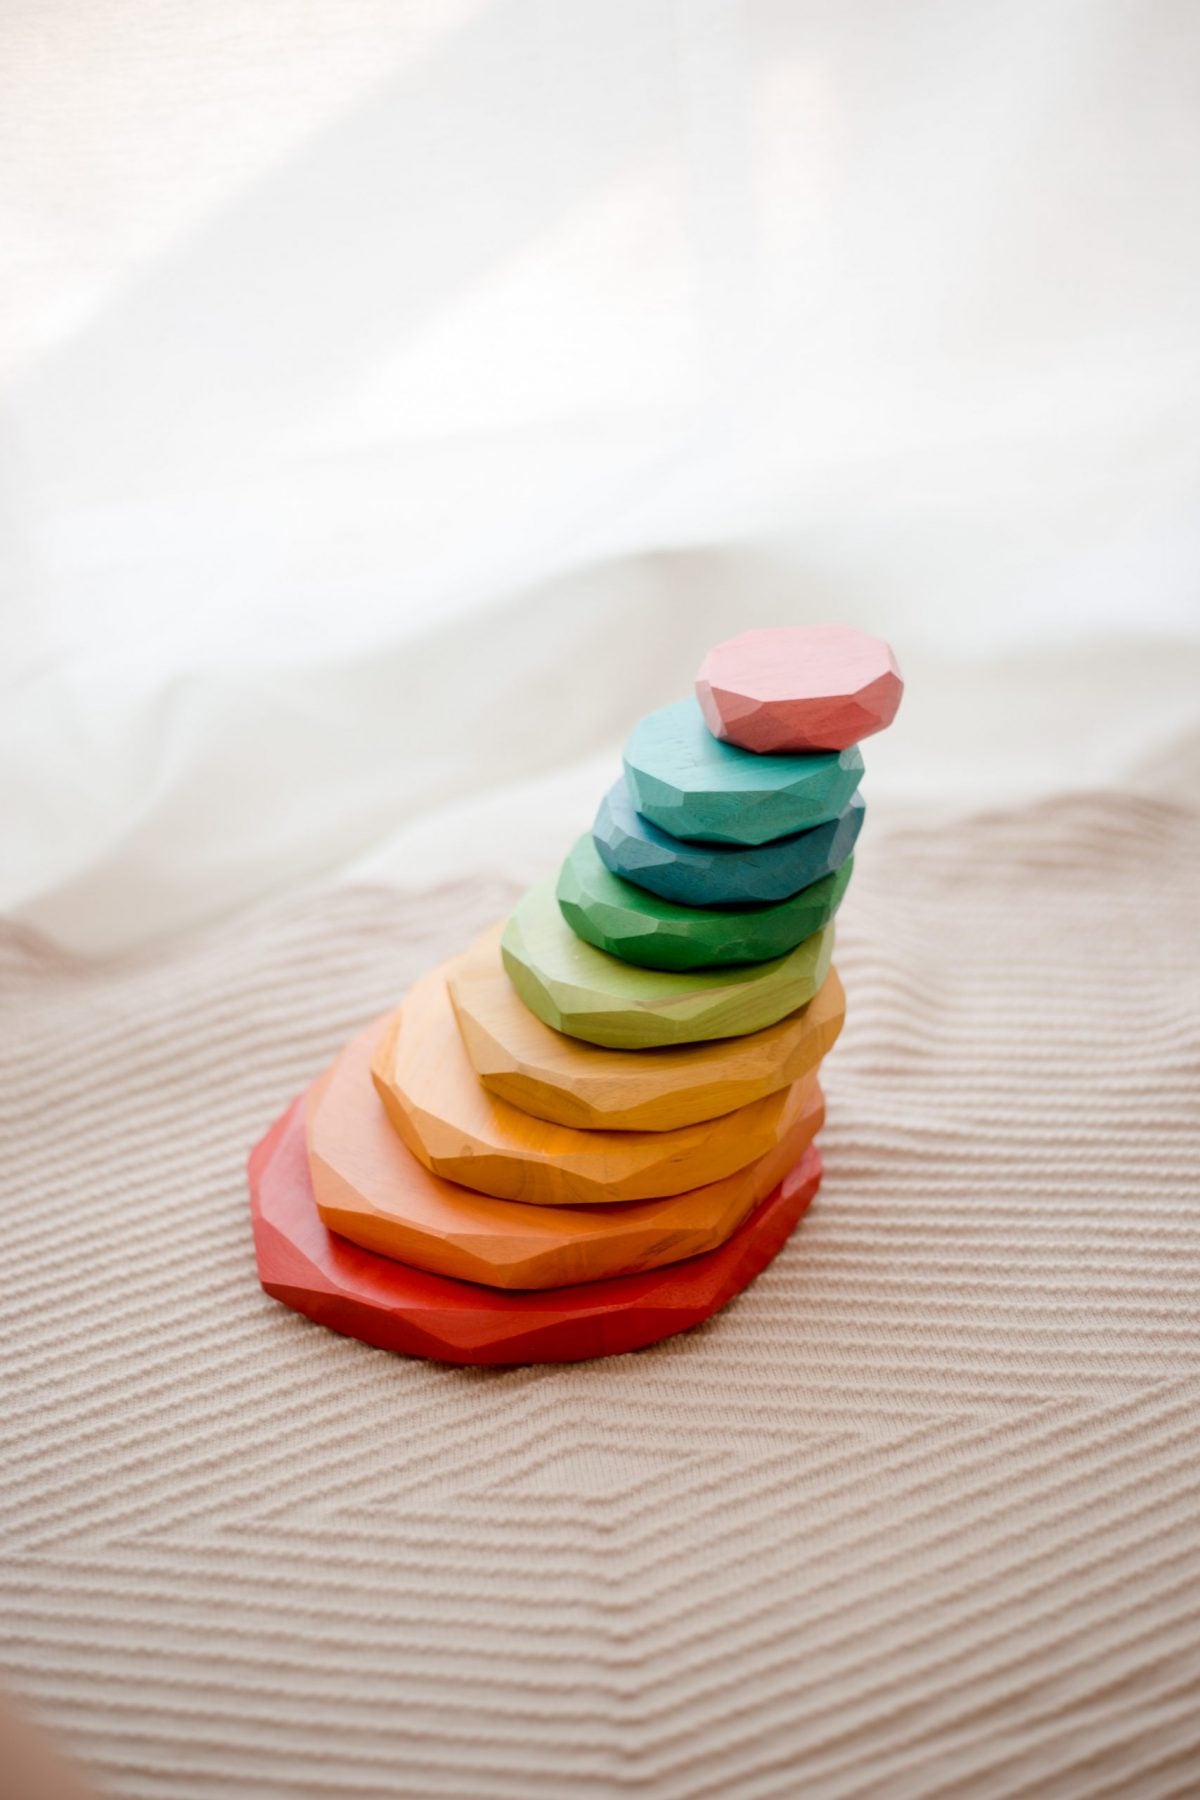 Wooden Stacking Stones for Montessori Learning